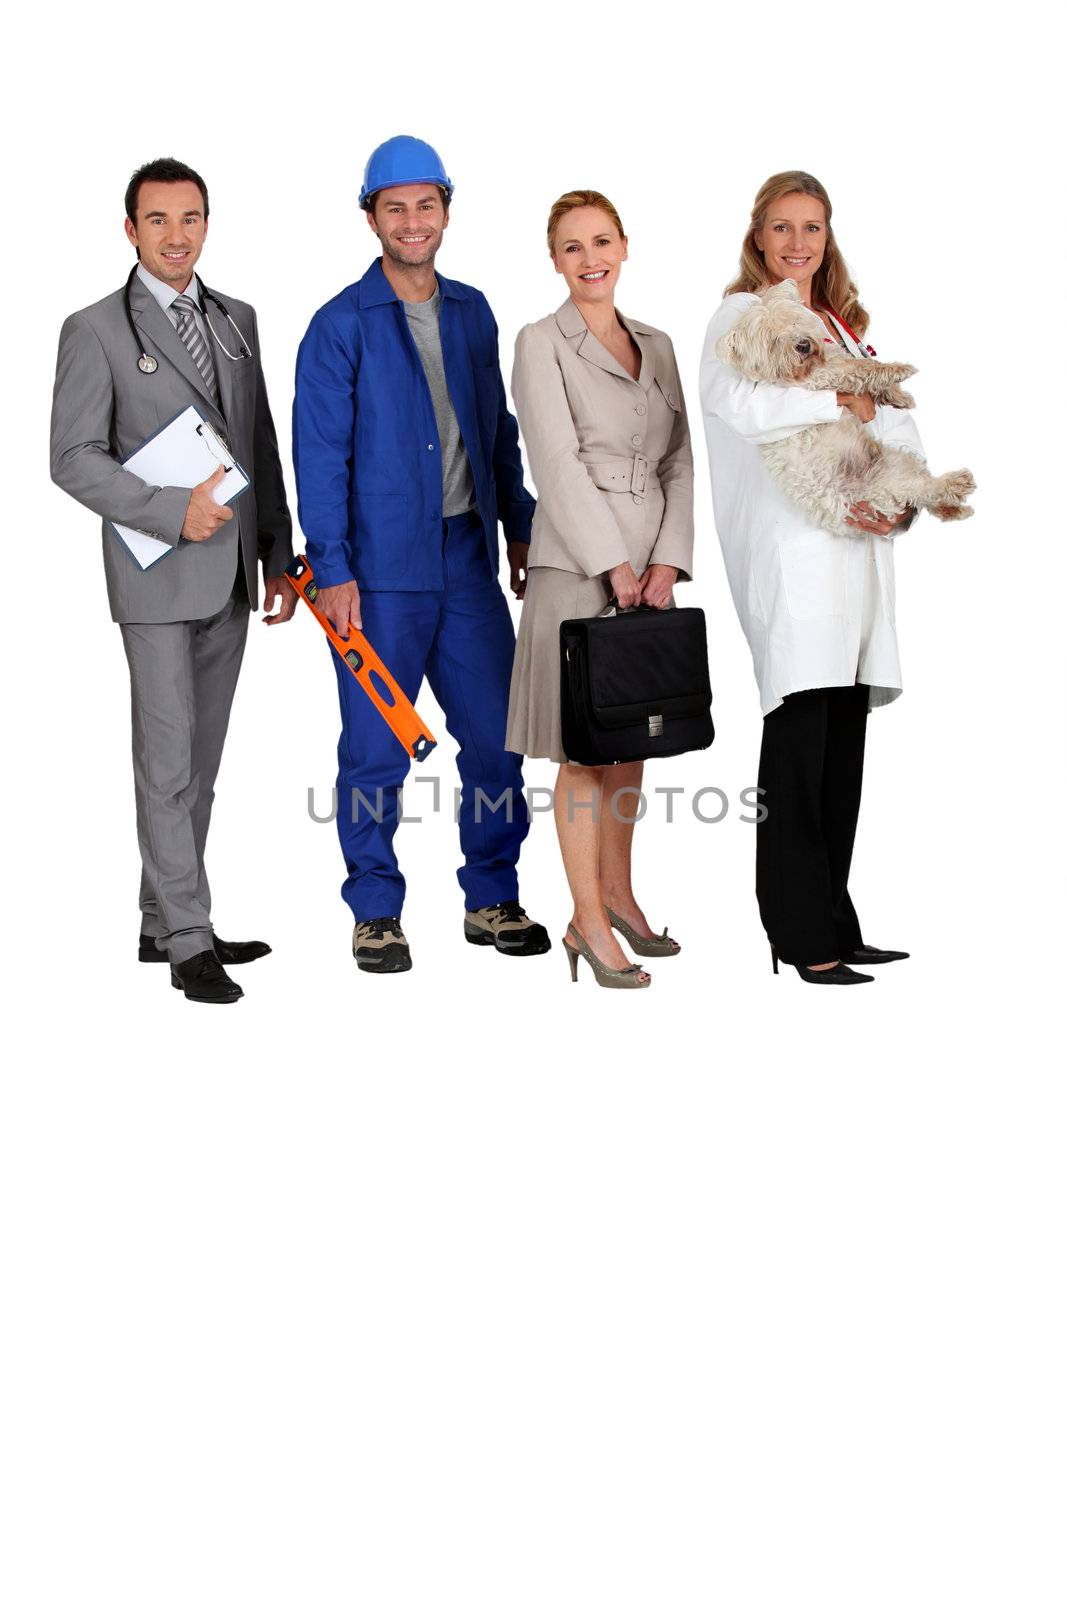 A doctor, a workman, an office woman and a vet with a dog in her arms all looking at us. by phovoir